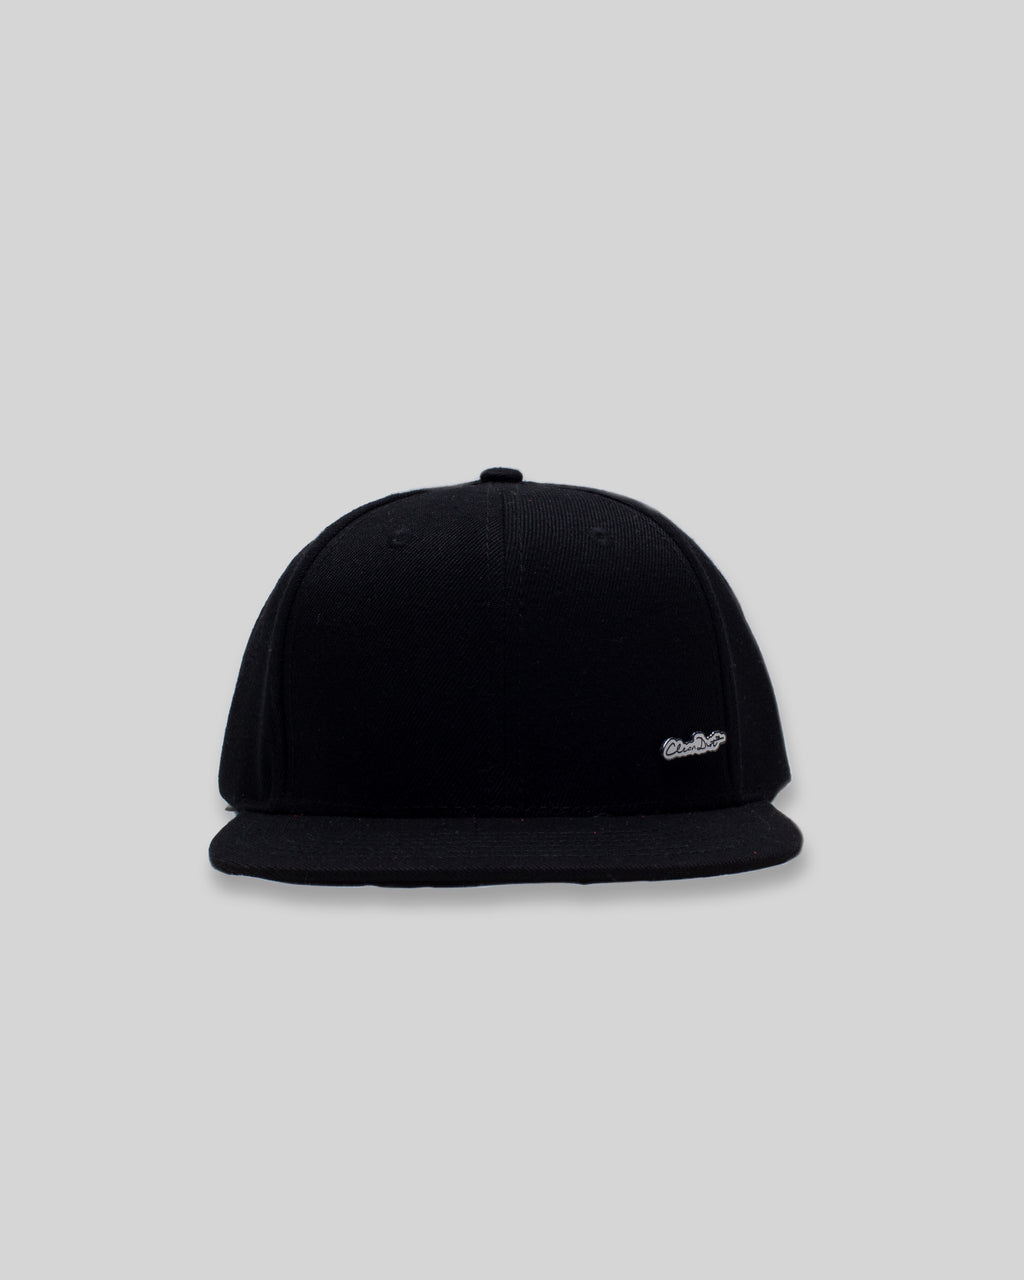 "Leather Strap" Ball Cap